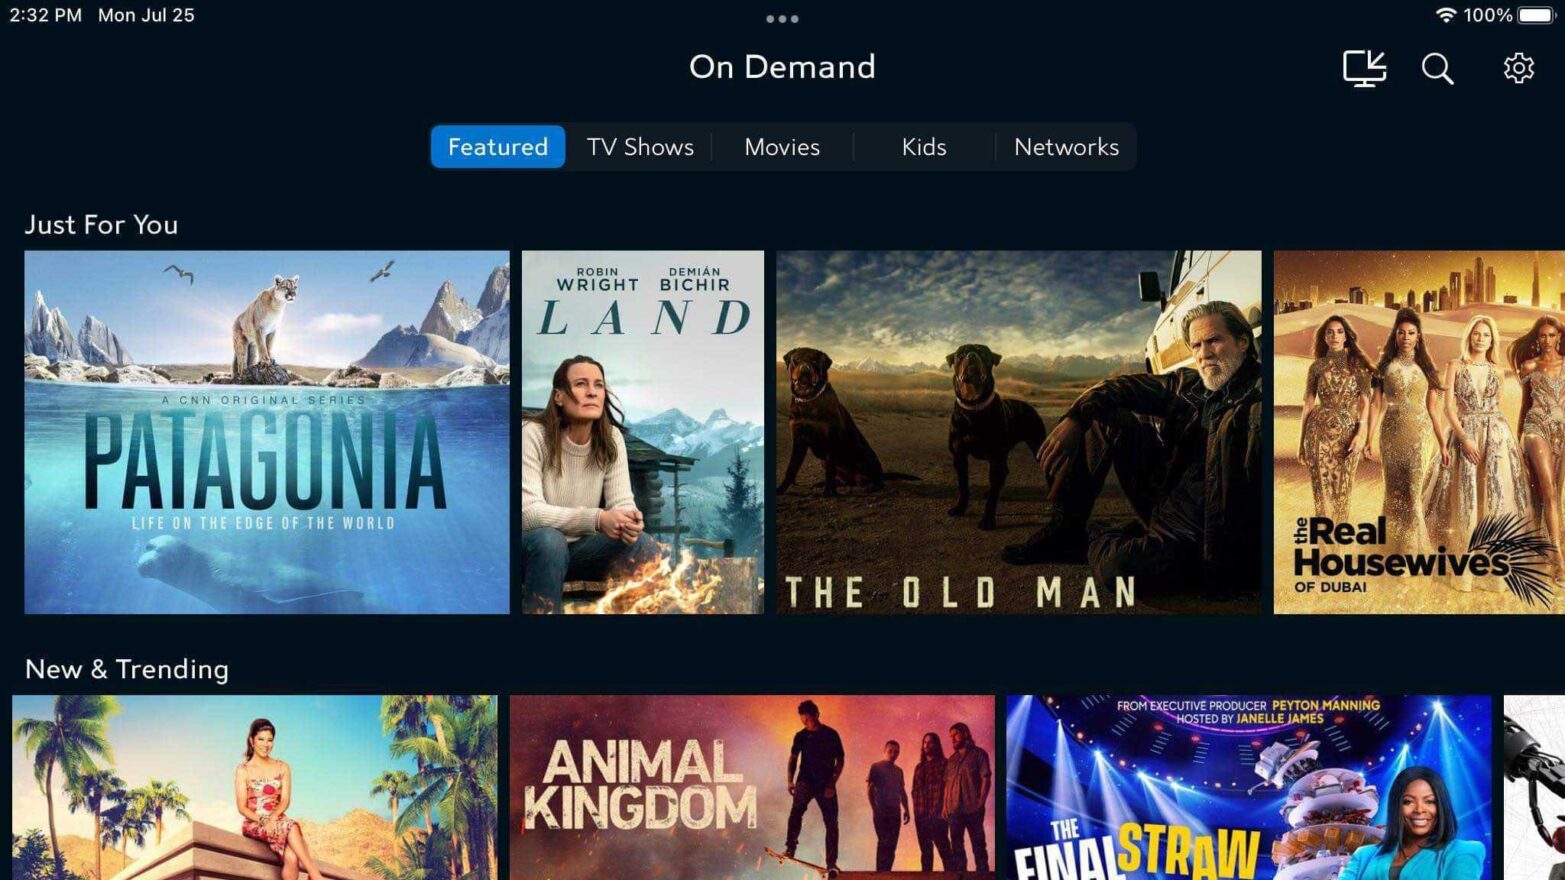 On Demand streaming title cards on the Spectrum app